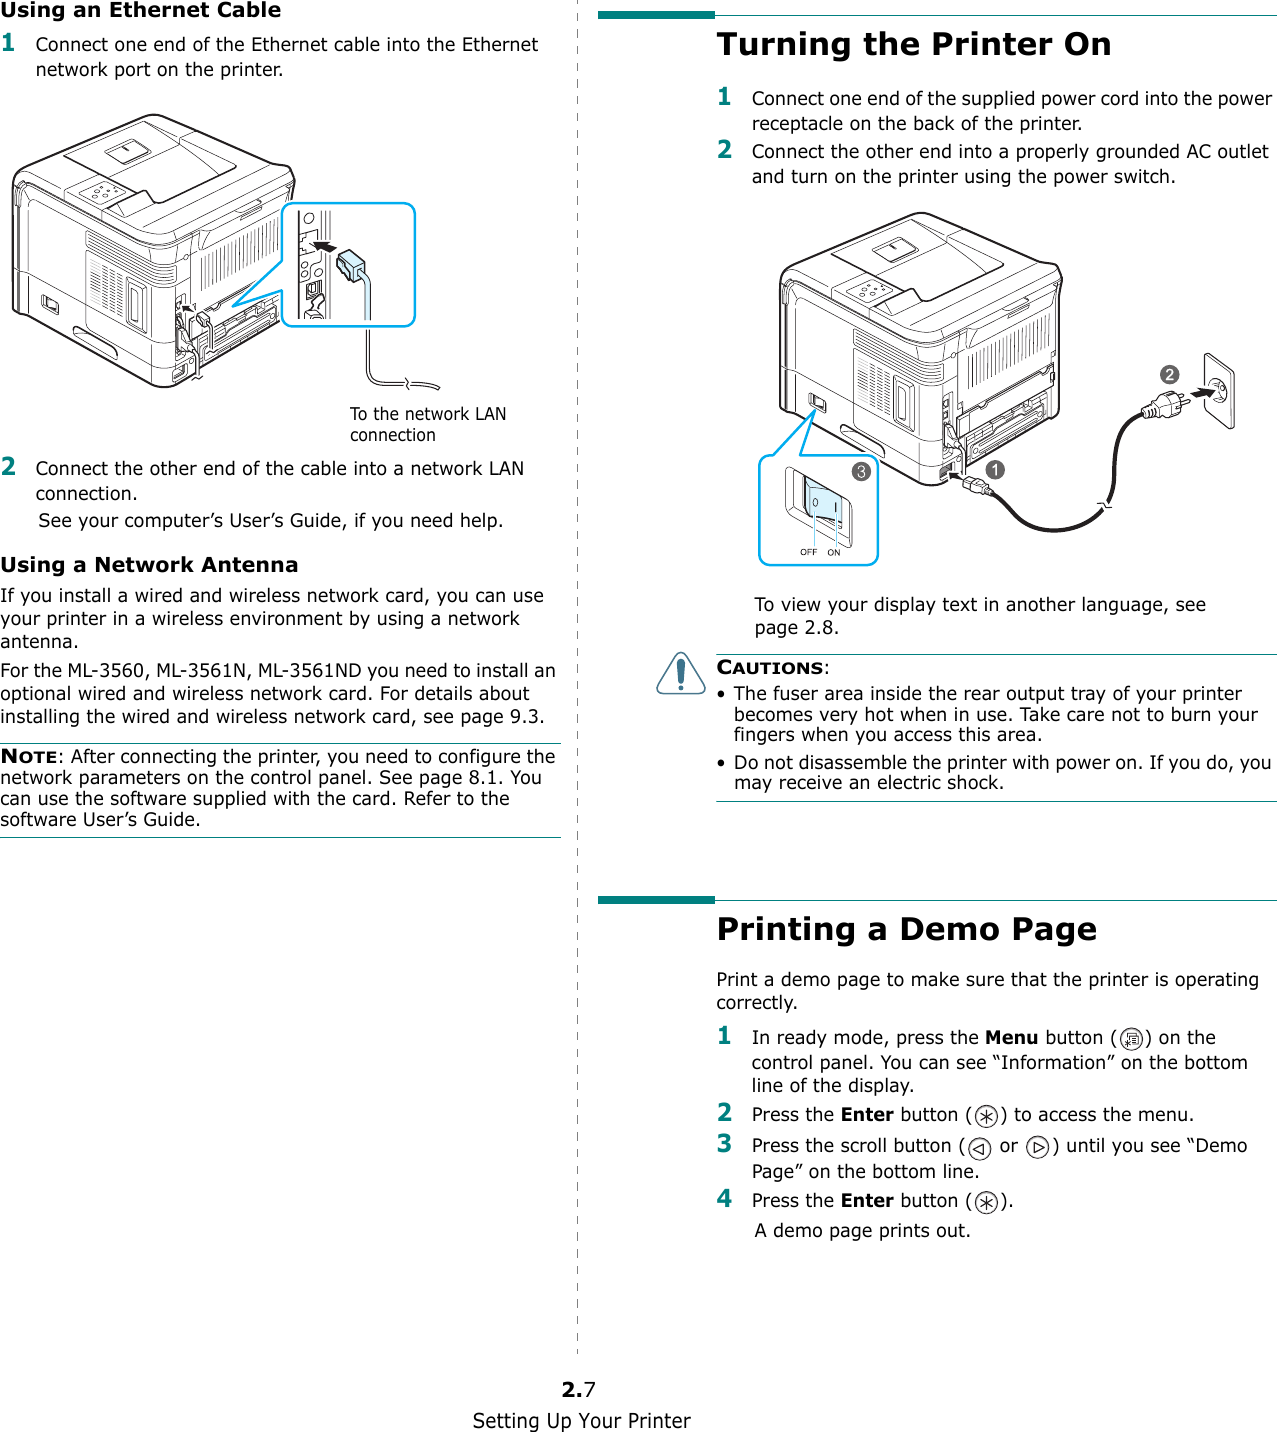 Setting Up Your Printer2.7Using an Ethernet Cable1Connect one end of the Ethernet cable into the Ethernet network port on the printer.2Connect the other end of the cable into a network LAN connection.See your computer’s User’s Guide, if you need help.Using a Network AntennaIf you install a wired and wireless network card, you can use your printer in a wireless environment by using a network antenna.For the ML-3560, ML-3561N, ML-3561ND you need to install an optional wired and wireless network card. For details about installing the wired and wireless network card, see page 9.3.NOTE: After connecting the printer, you need to configure the network parameters on the control panel. See page 8.1. You can use the software supplied with the card. Refer to the software User’s Guide. To the network LAN connectionTurning the Printer On1Connect one end of the supplied power cord into the power receptacle on the back of the printer. 2Connect the other end into a properly grounded AC outlet and turn on the printer using the power switch.To view your display text in another language, see page 2.8.CAUTIONS:• The fuser area inside the rear output tray of your printer becomes very hot when in use. Take care not to burn your fingers when you access this area.• Do not disassemble the printer with power on. If you do, you may receive an electric shock.Printing a Demo PagePrint a demo page to make sure that the printer is operating correctly.1In ready mode, press the Menu button ( ) on the control panel. You can see “Information” on the bottom line of the display.2Press the Enter button ( ) to access the menu.3Press the scroll button (  or  ) until you see “Demo Page” on the bottom line.4Press the Enter button ( ).A demo page prints out.